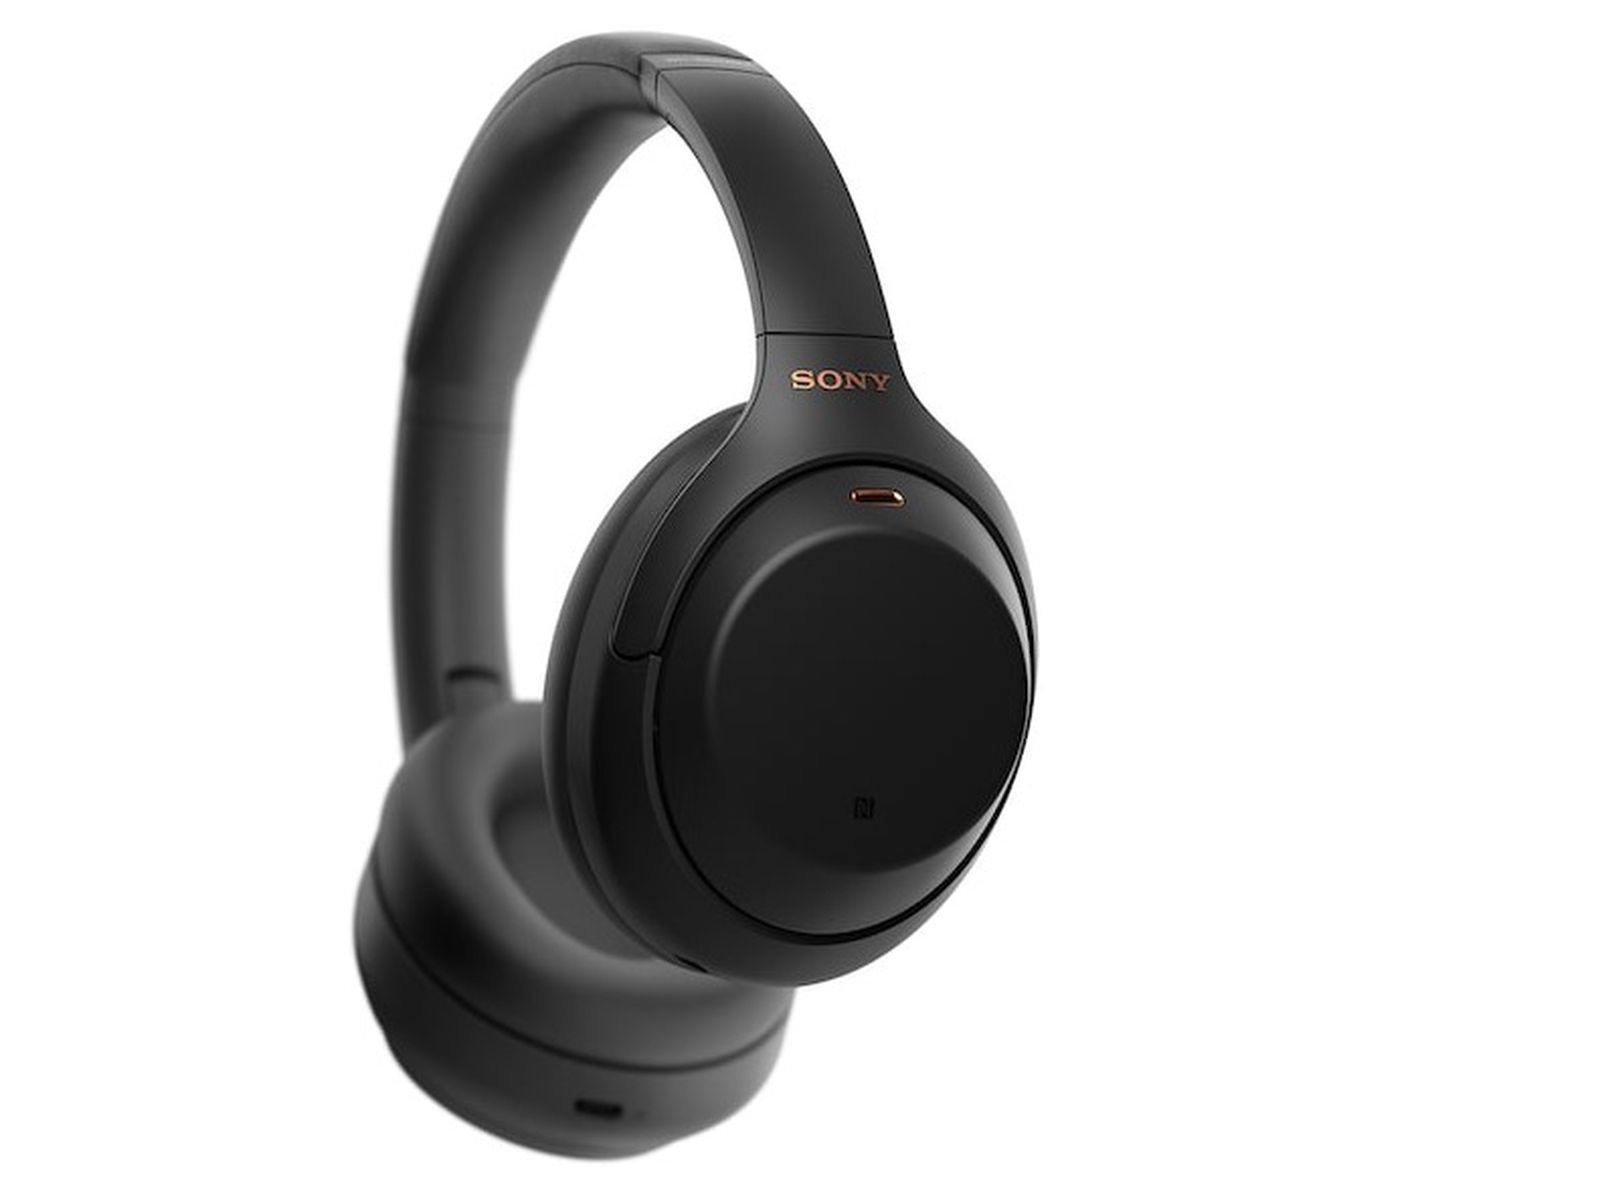 Sony WH-1000XM4 Available for $350 MacRumors